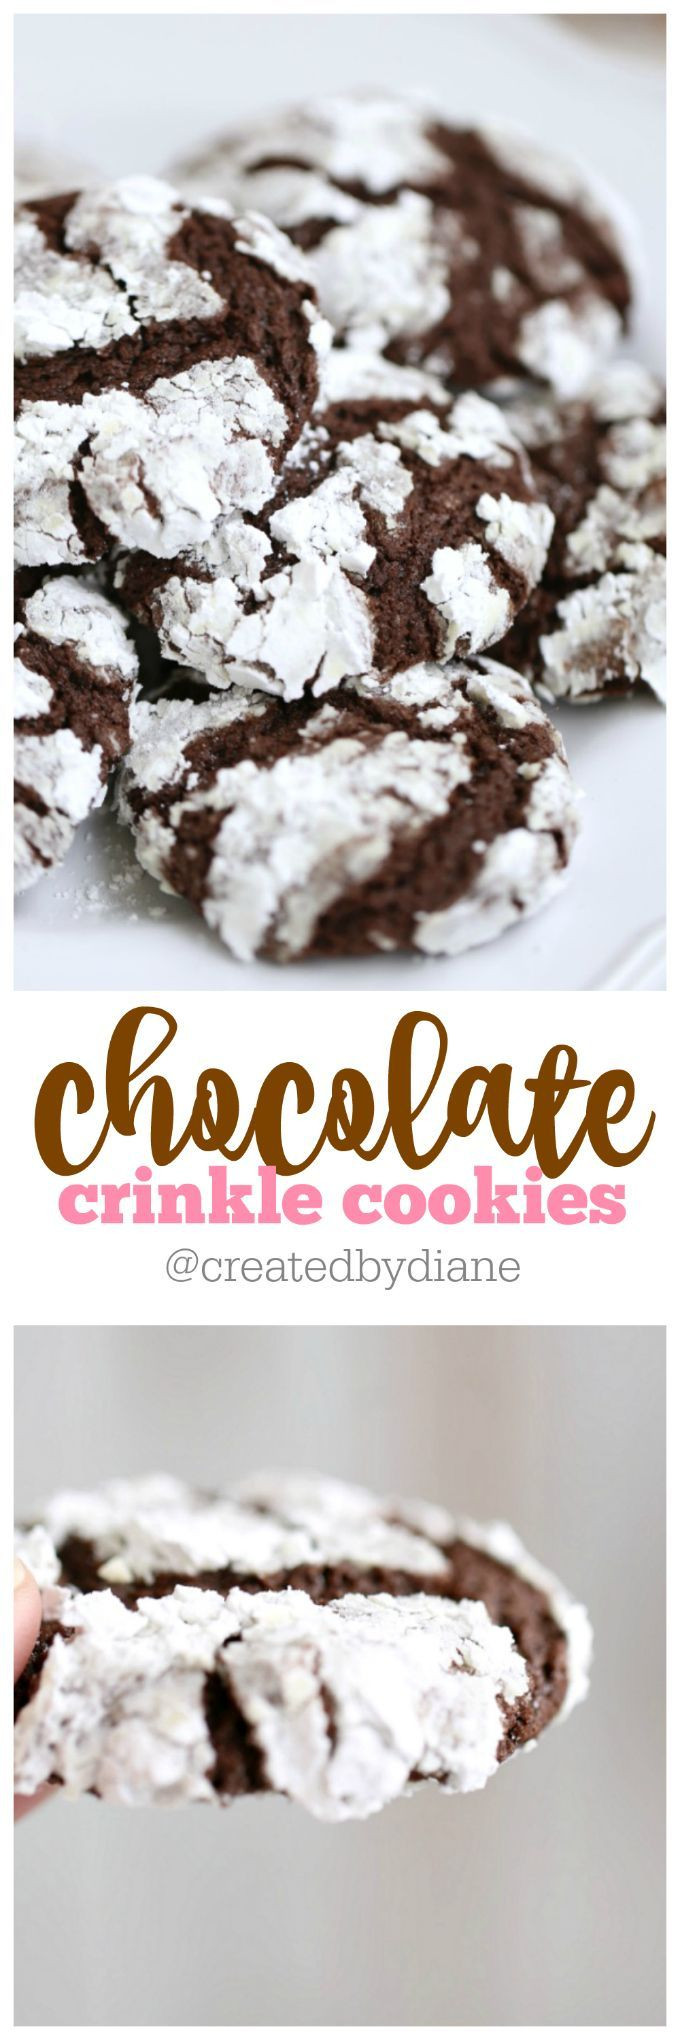 Chocolate Christmas Cookies With Powdered Sugar
 25 best ideas about Powdered sugar on Pinterest